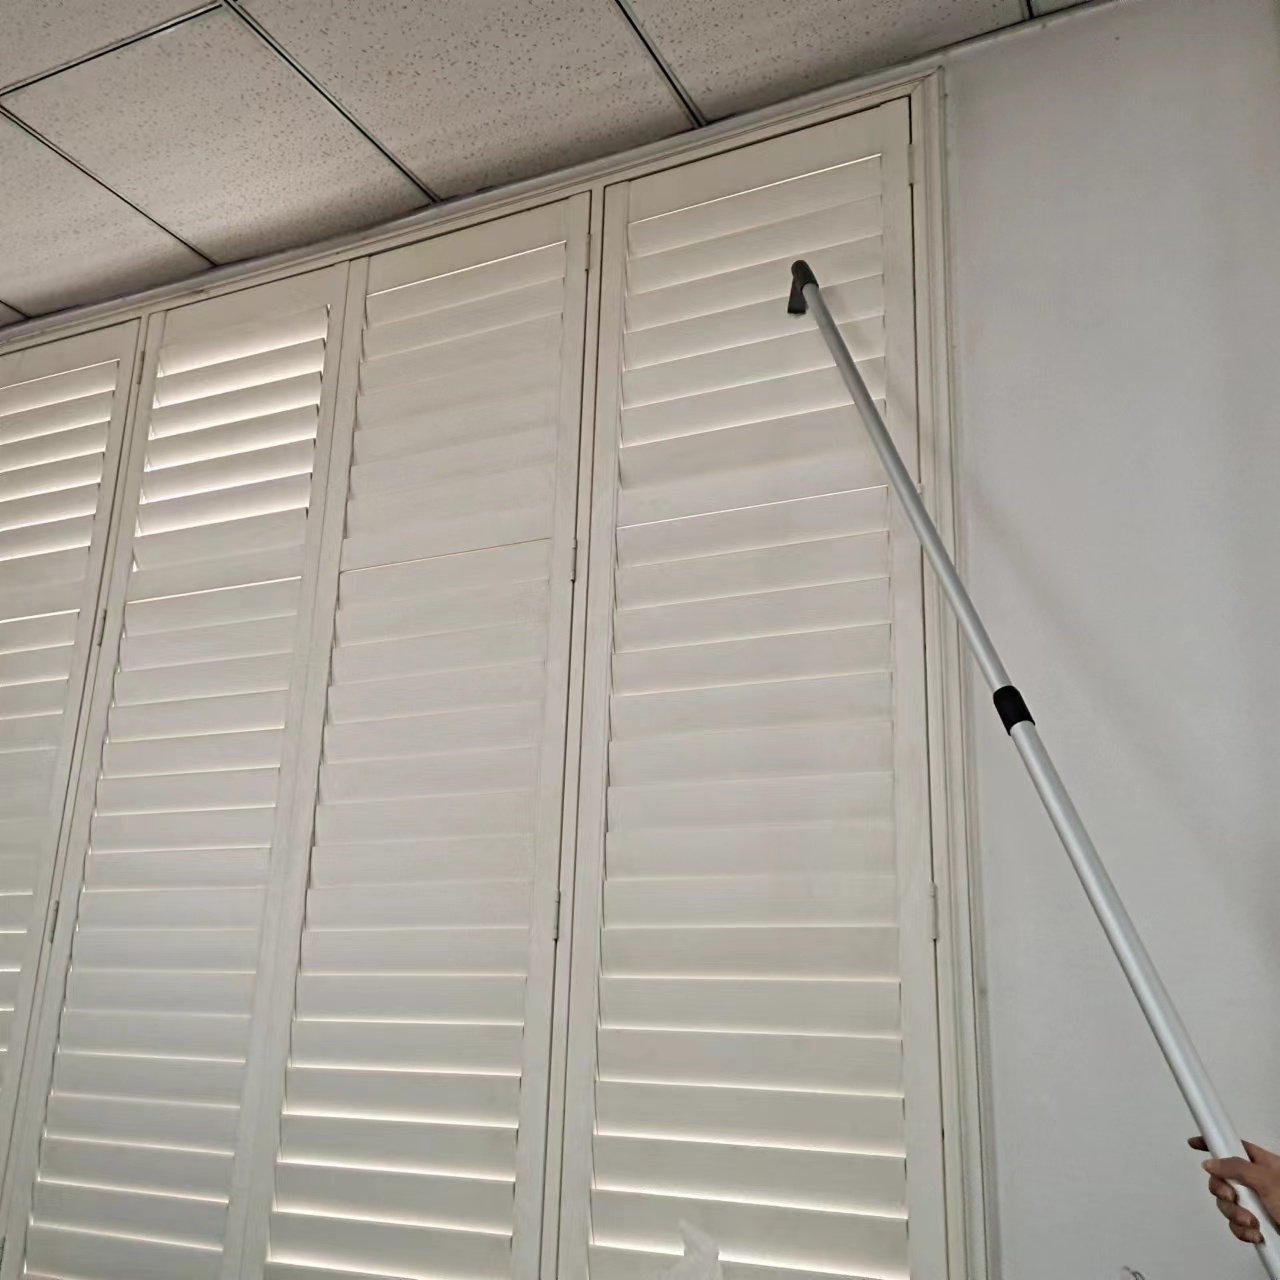 China shutter extended rod supplier,shutter extended rod to open and close high place louver,handheld shutter extended rod